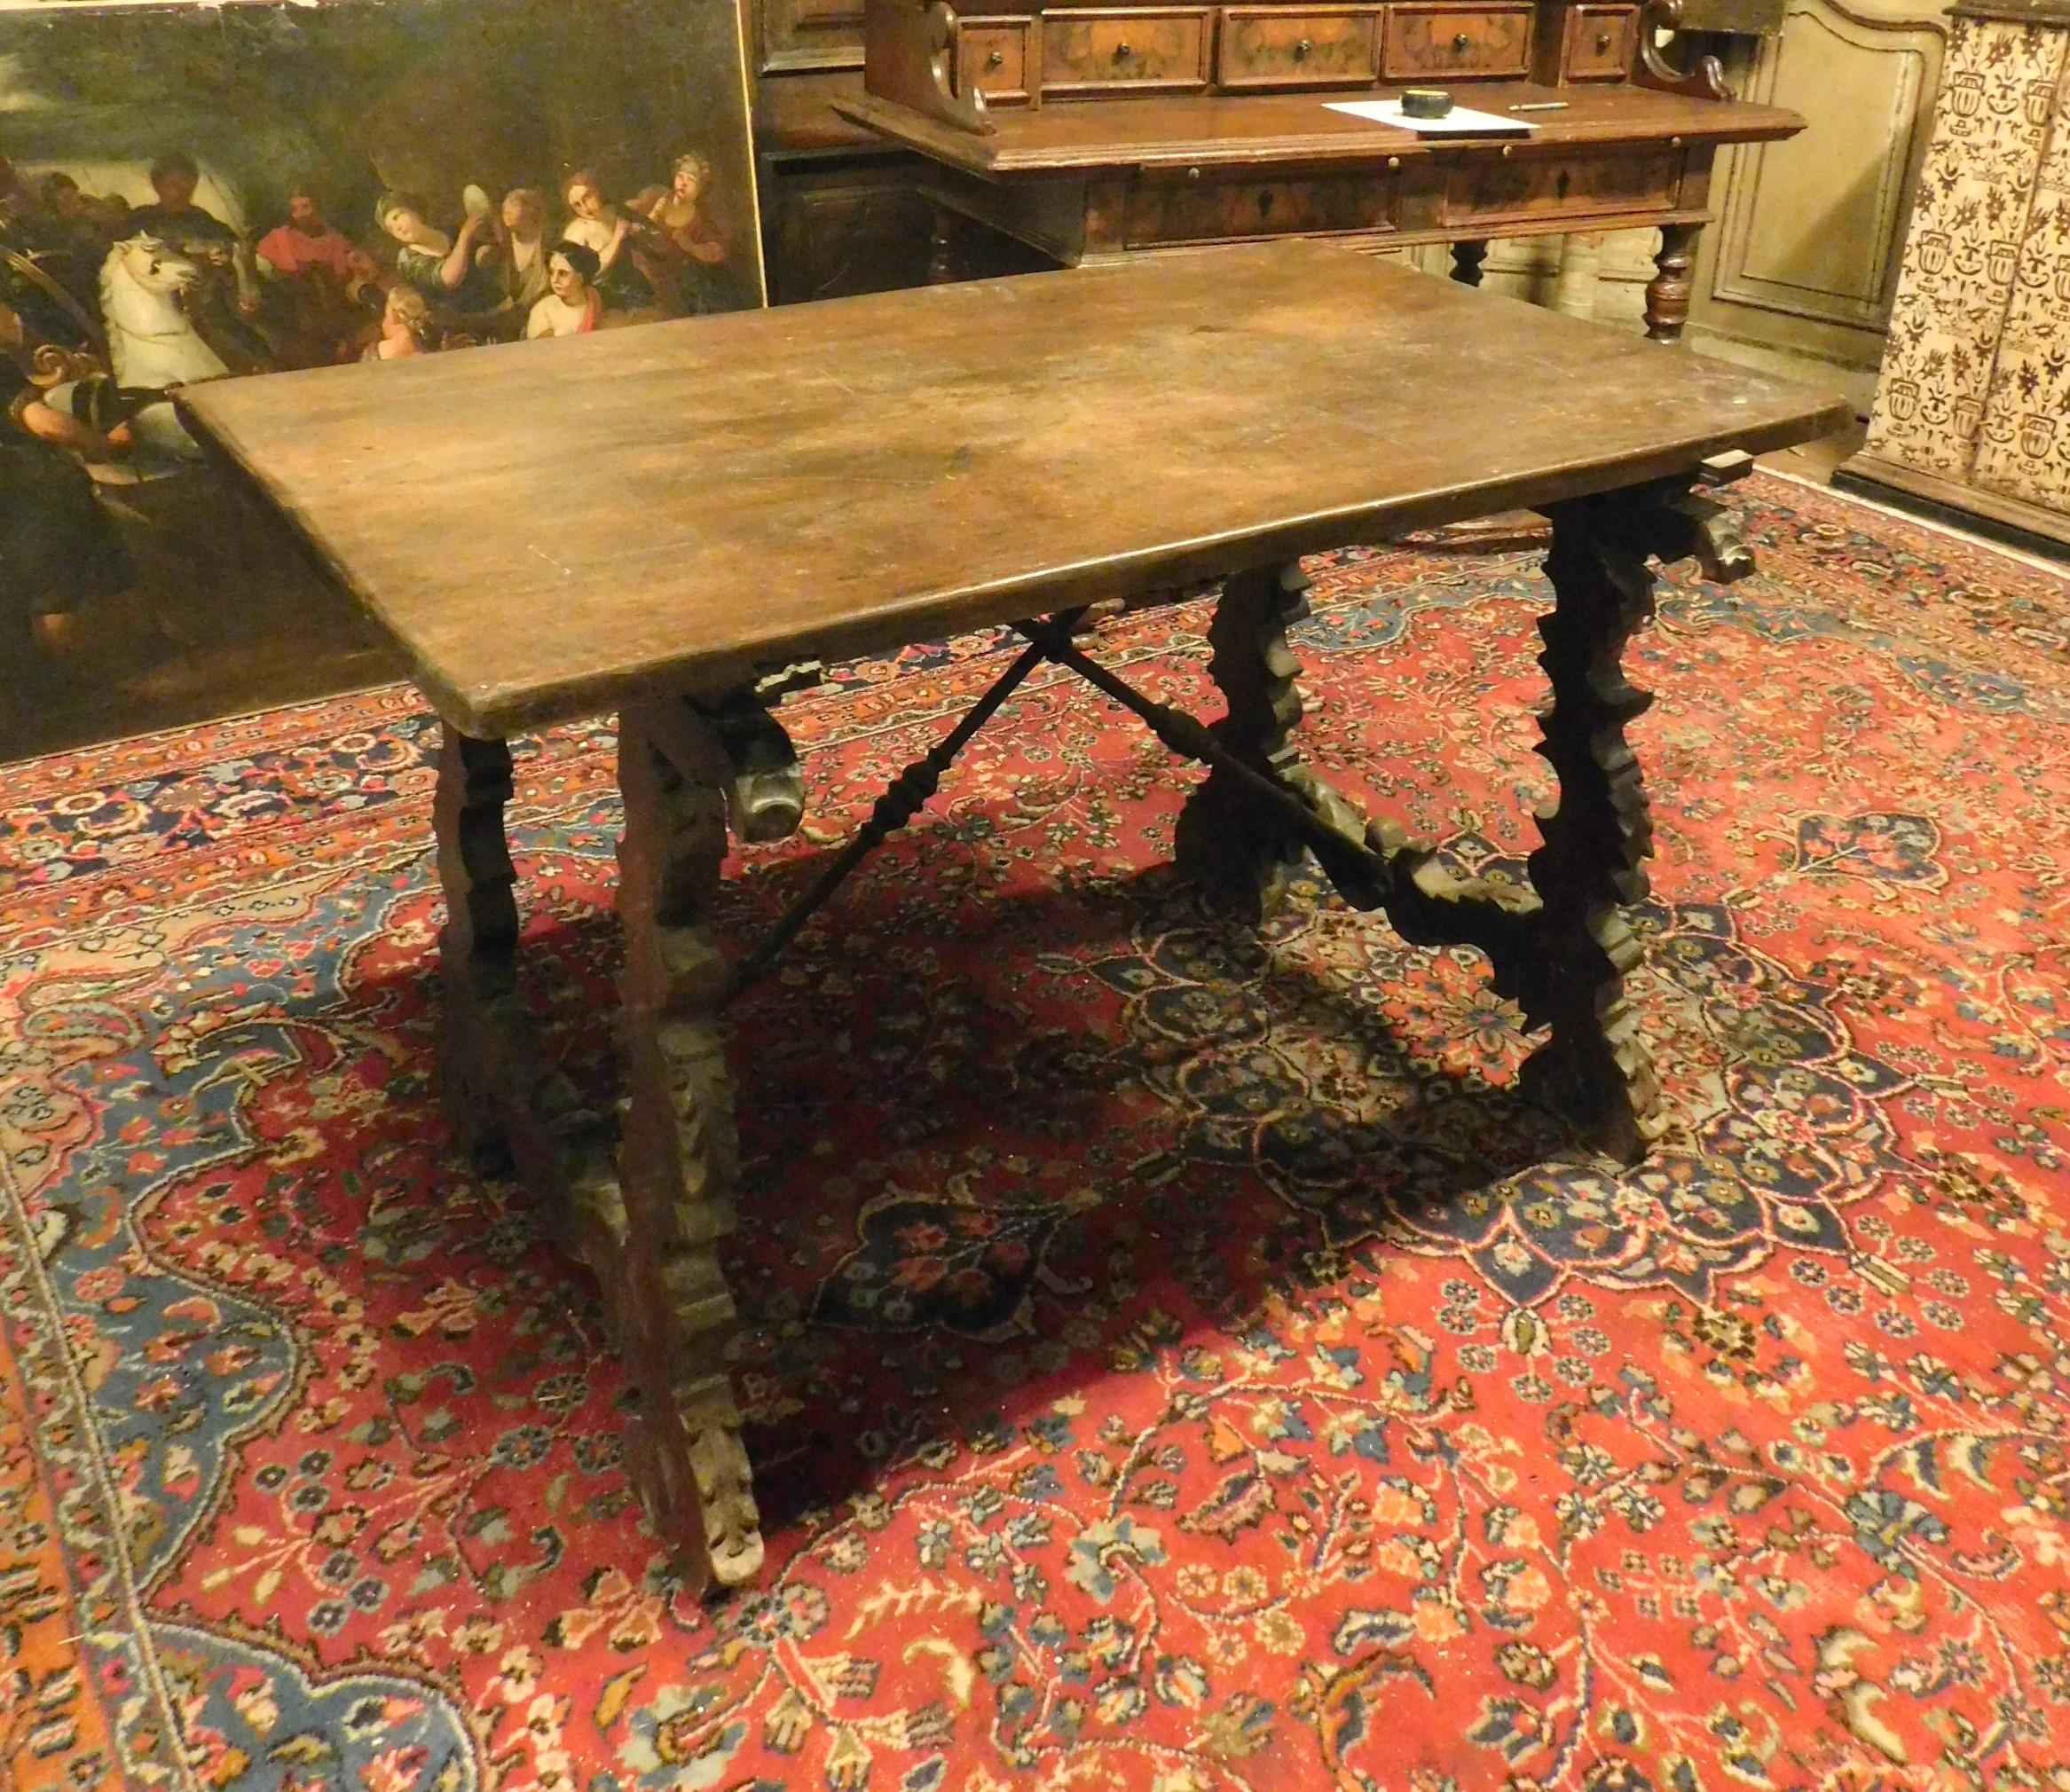 Spanish Antique Refectory Table in Walnut, Wavy Legs and Iron, 18th Century Spain For Sale